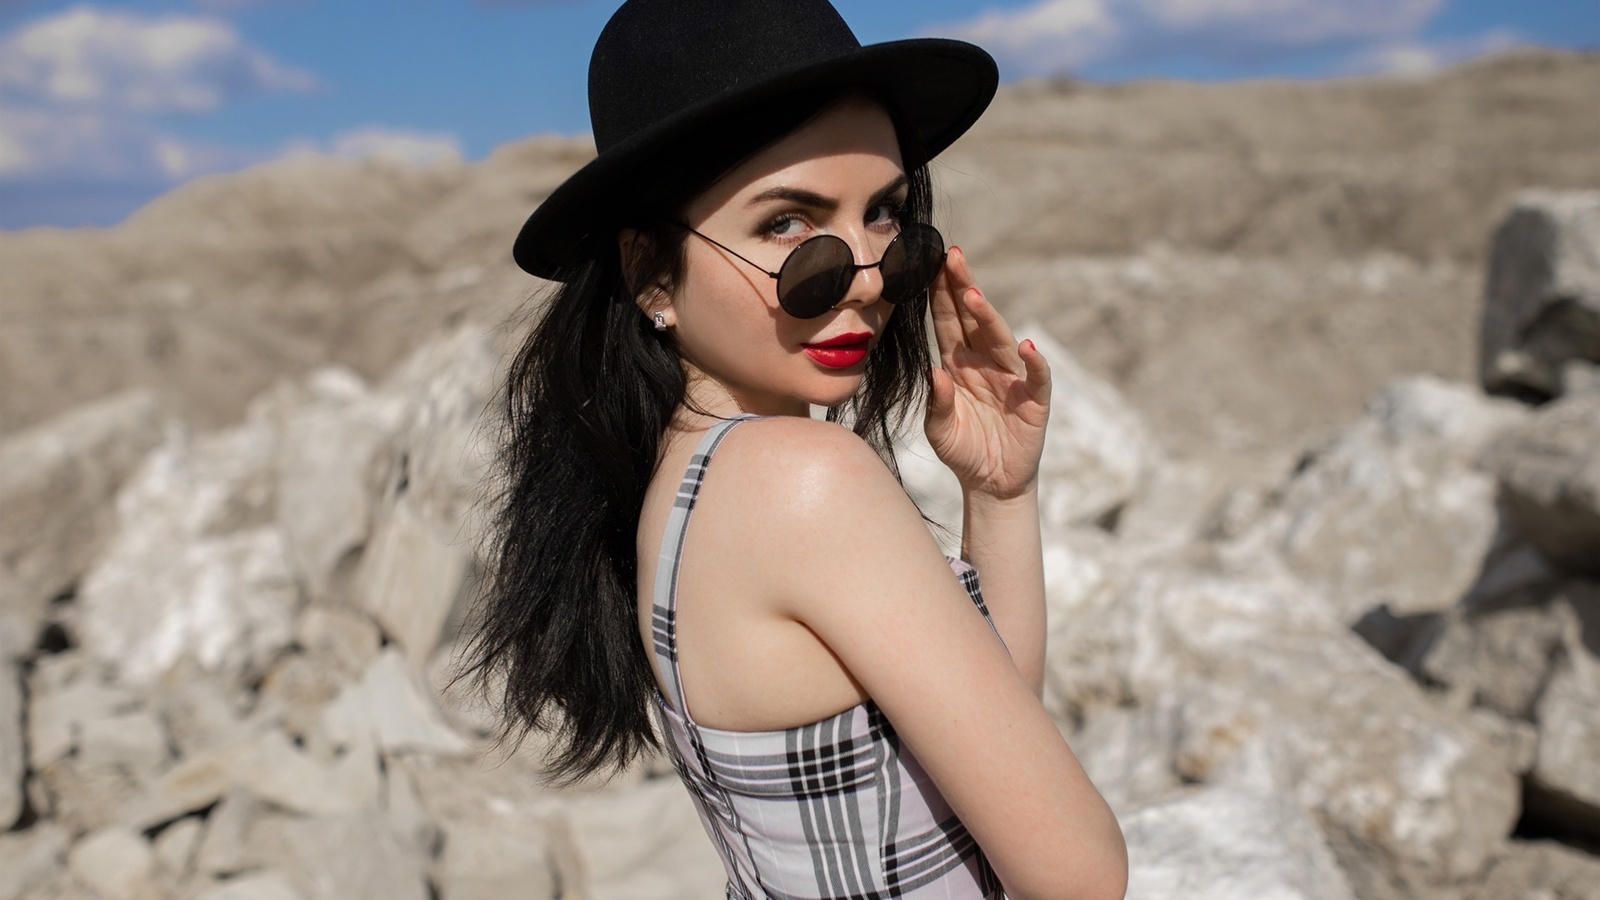 red lipstick, brunette, , women outdoors, sky, clouds, women with glasses, model, women with shades, rocks, dress, black hat